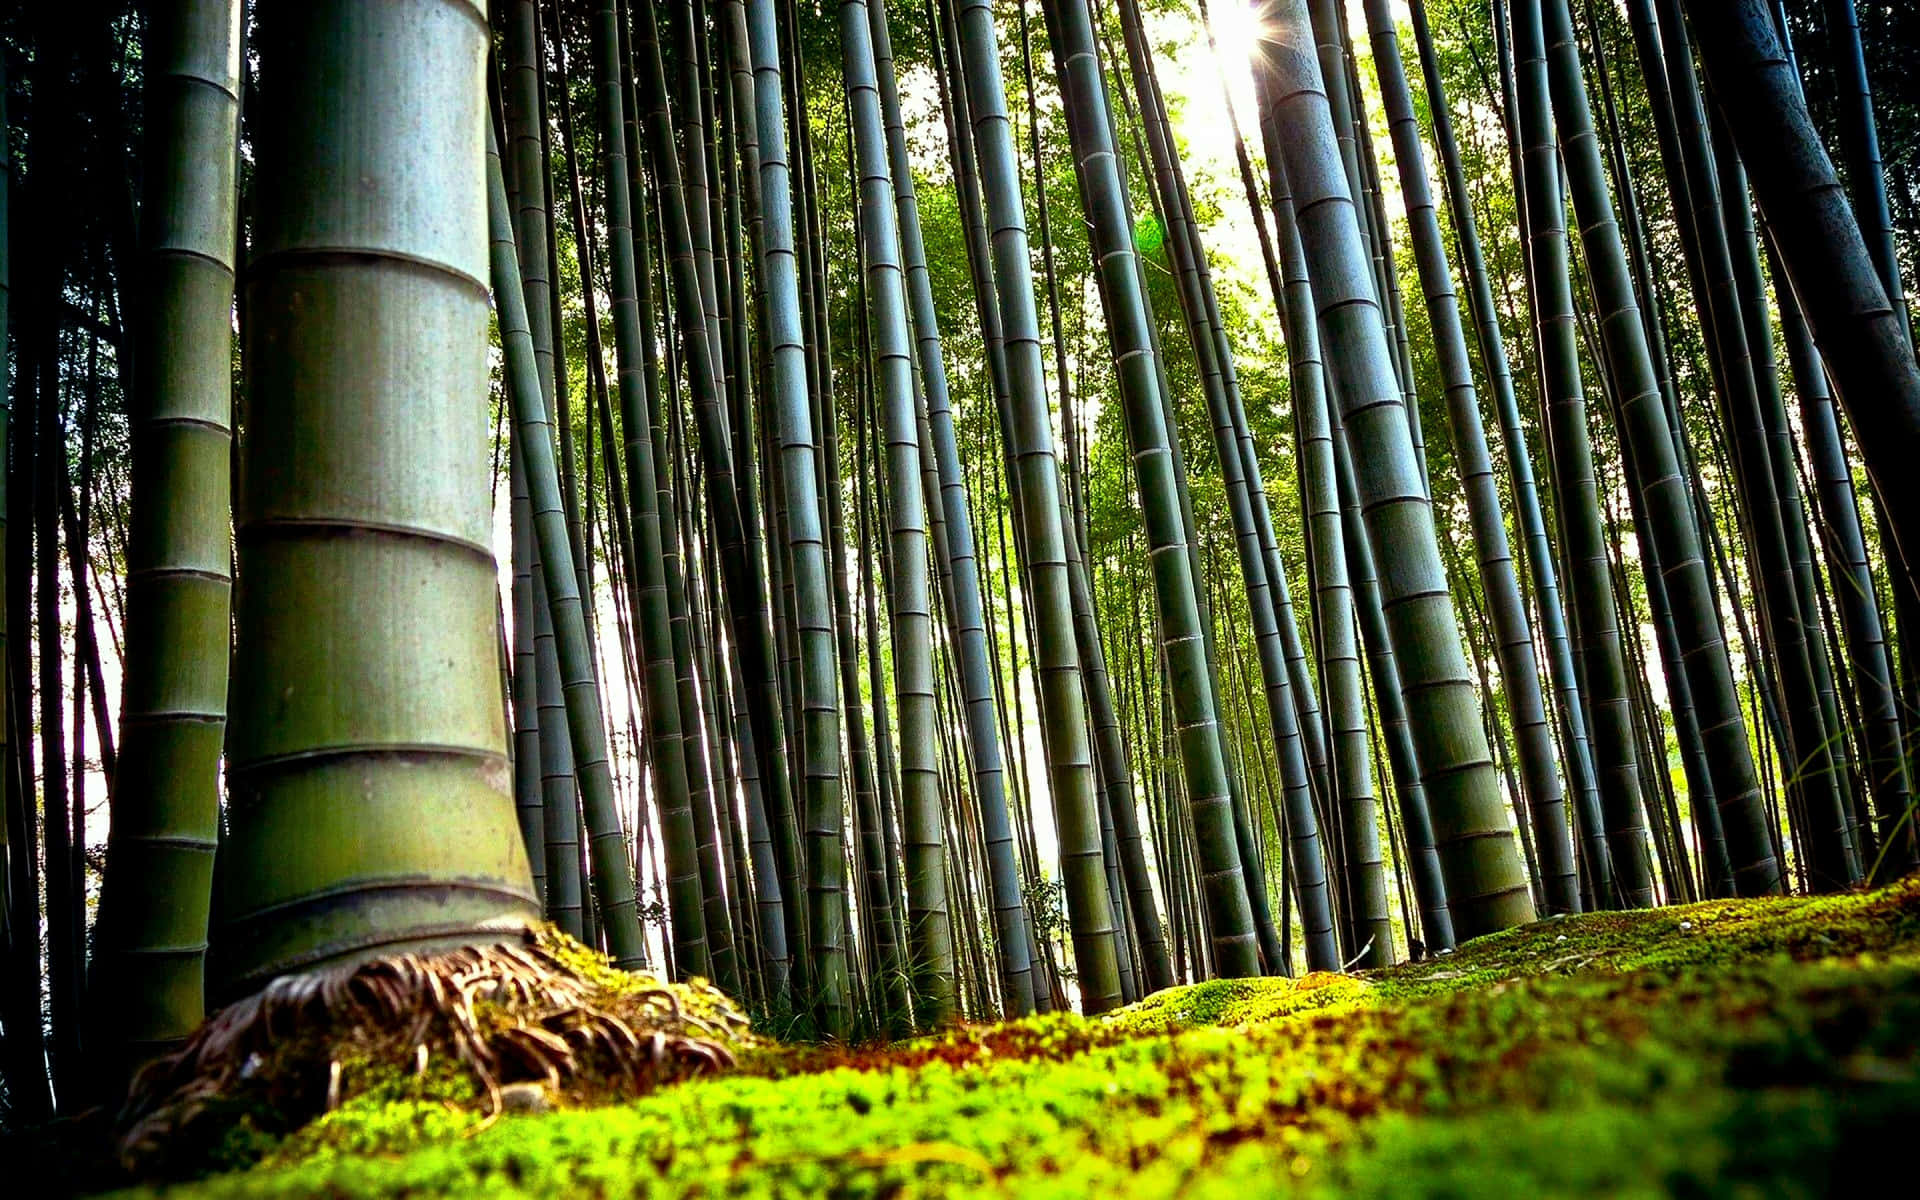 A Peaceful View Of A Bamboo Forest